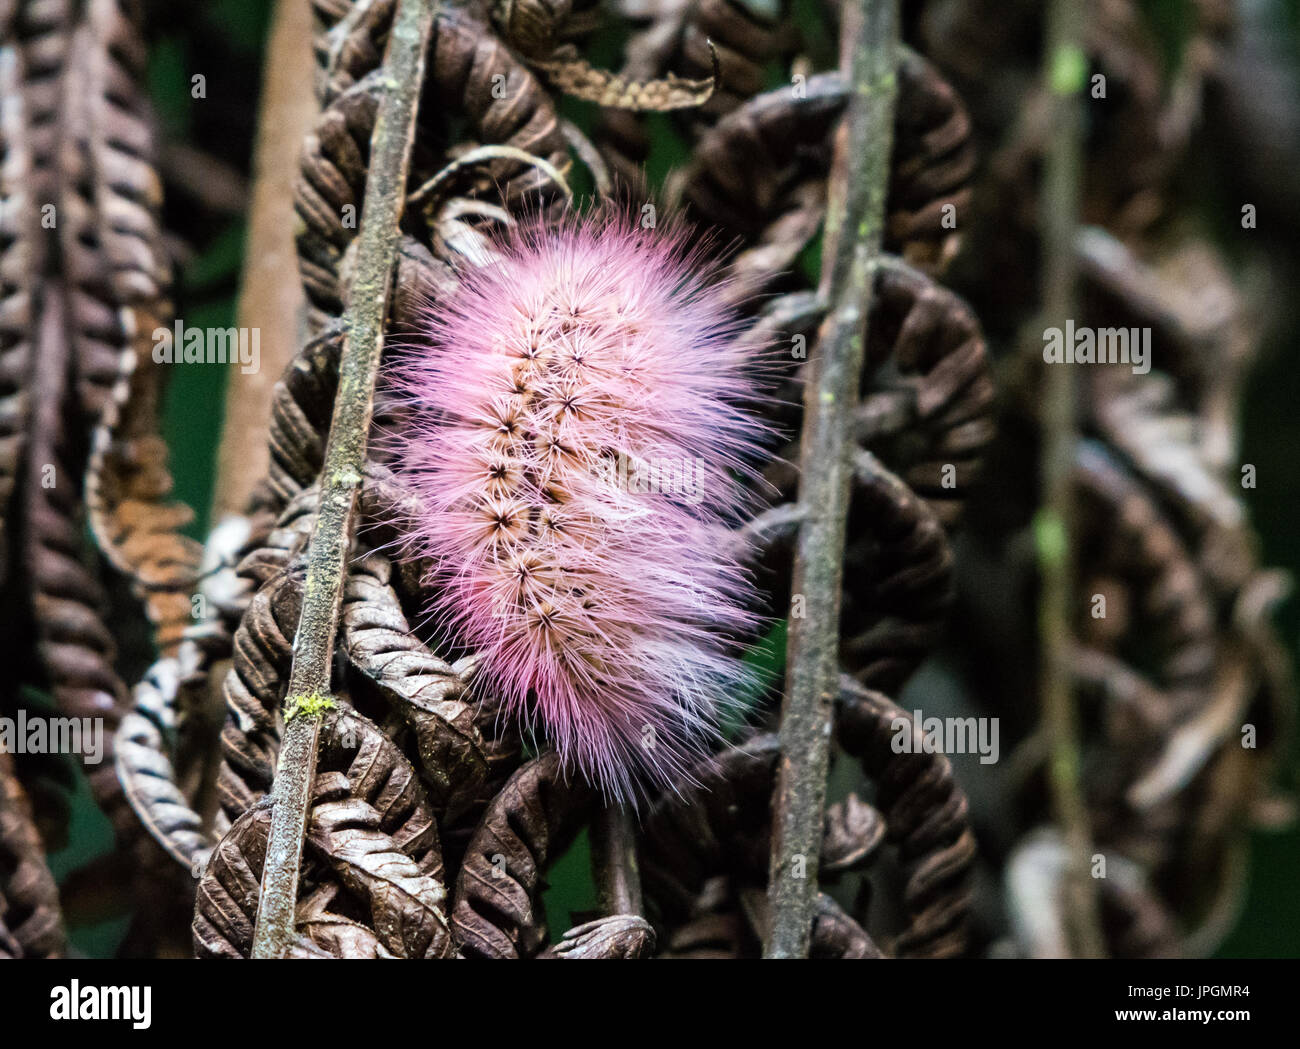 A pink hairy caterpillar. Colombia, South America. Stock Photo